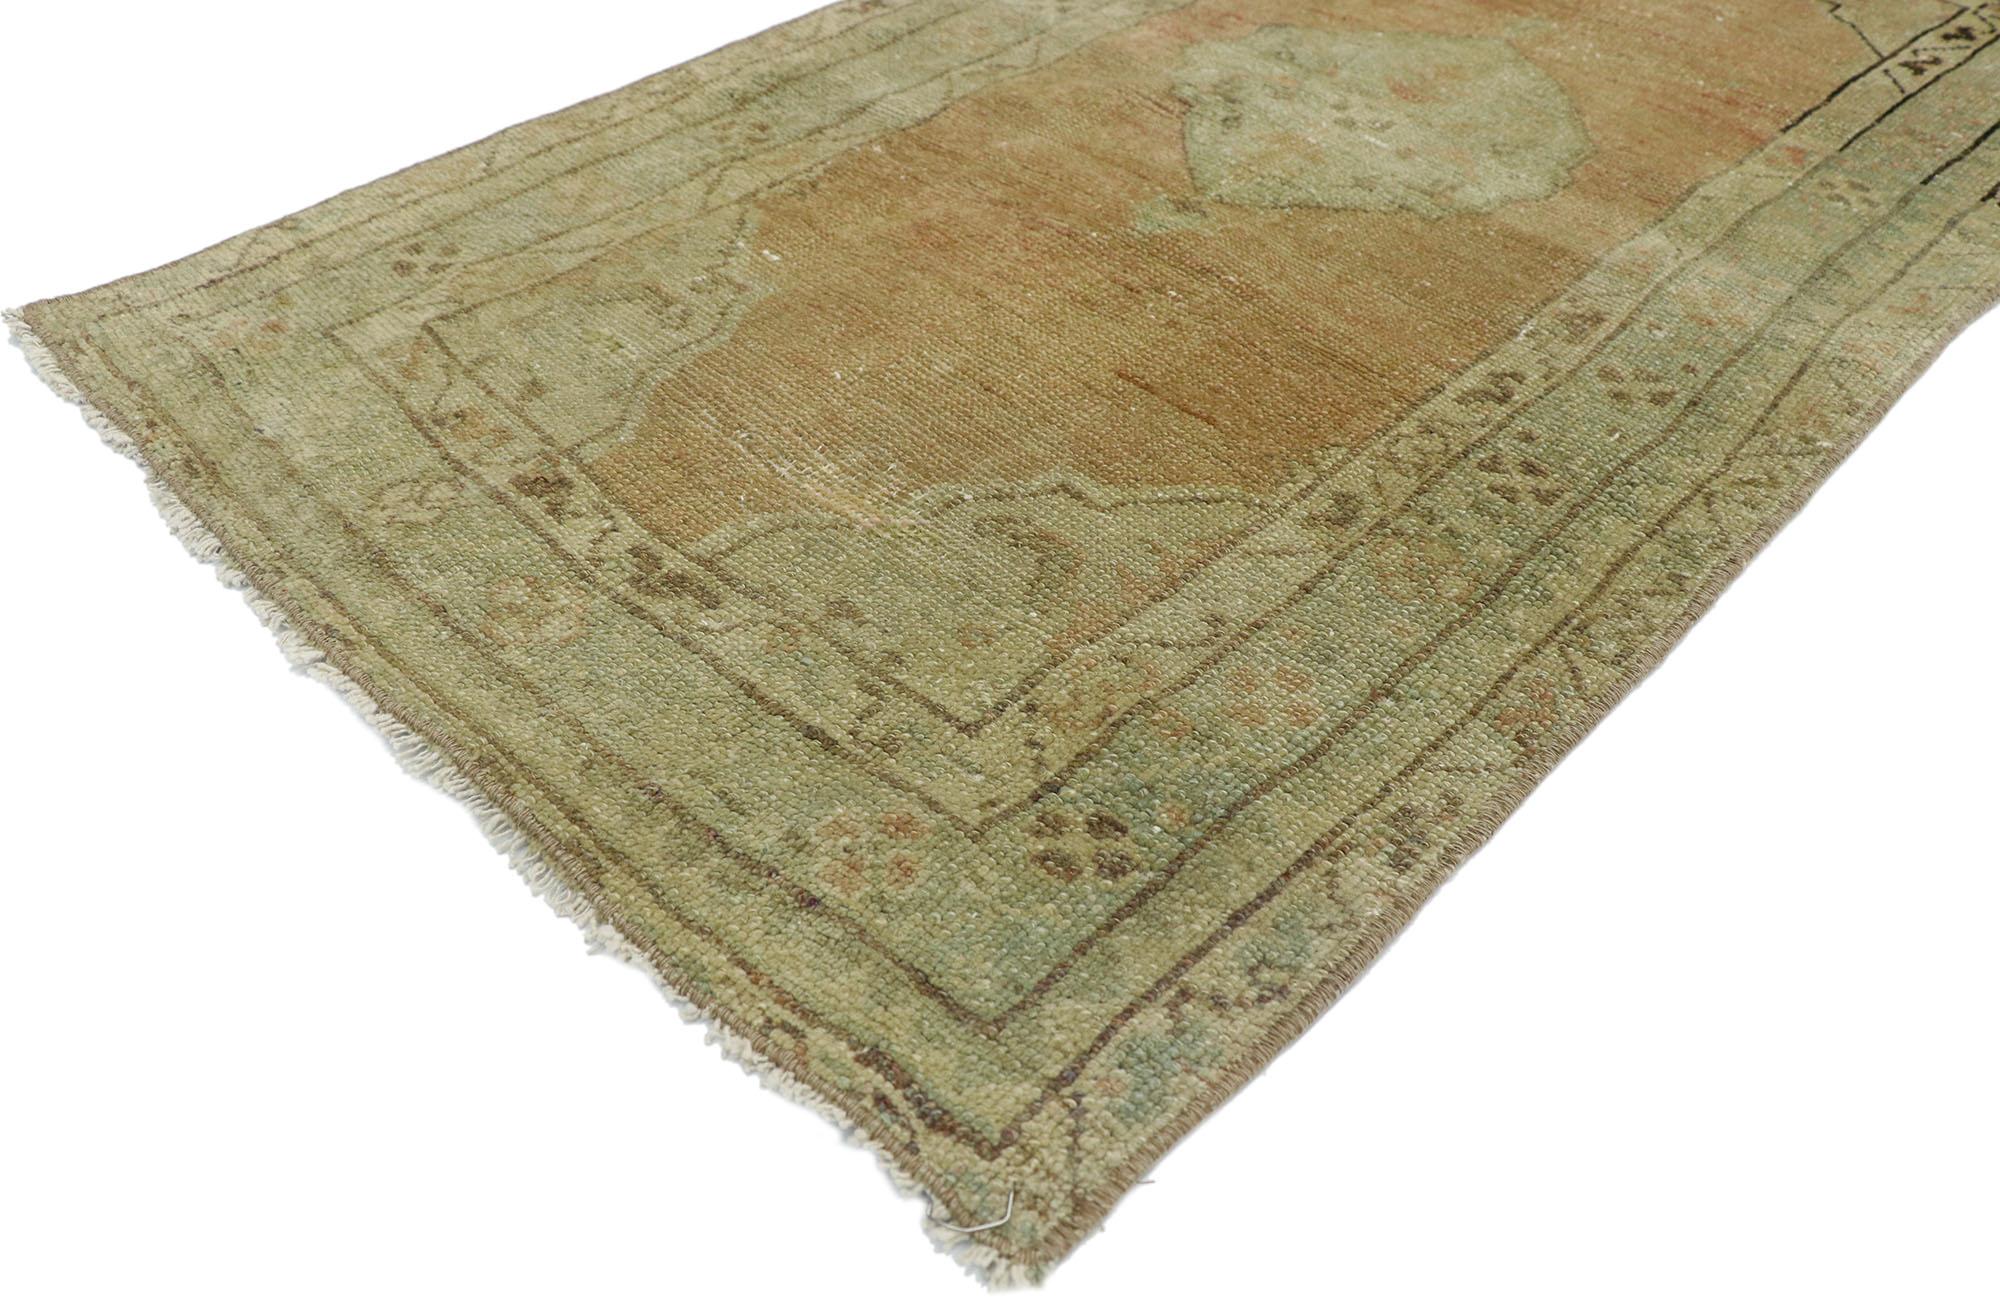 52714, distressed vintage Turkish Oushak Yastik rug, Scatter Accent rug. This hand knotted wool distressed vintage Turkish Oushak accent rug features a cusped almond shaped medallion anchored with palmette pendants at either side in an open abrashed